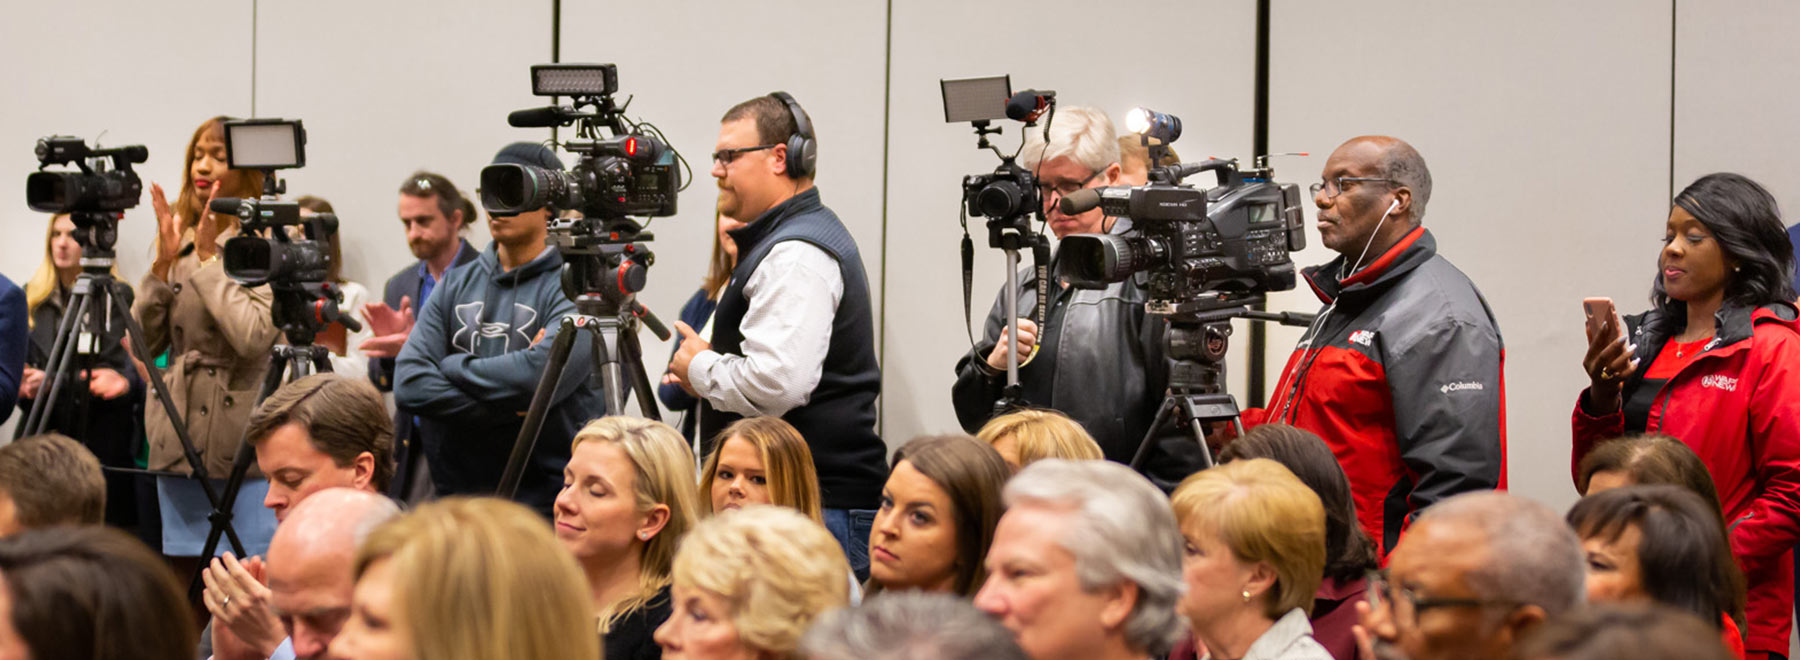 Video cameras in the back of the room during an event.